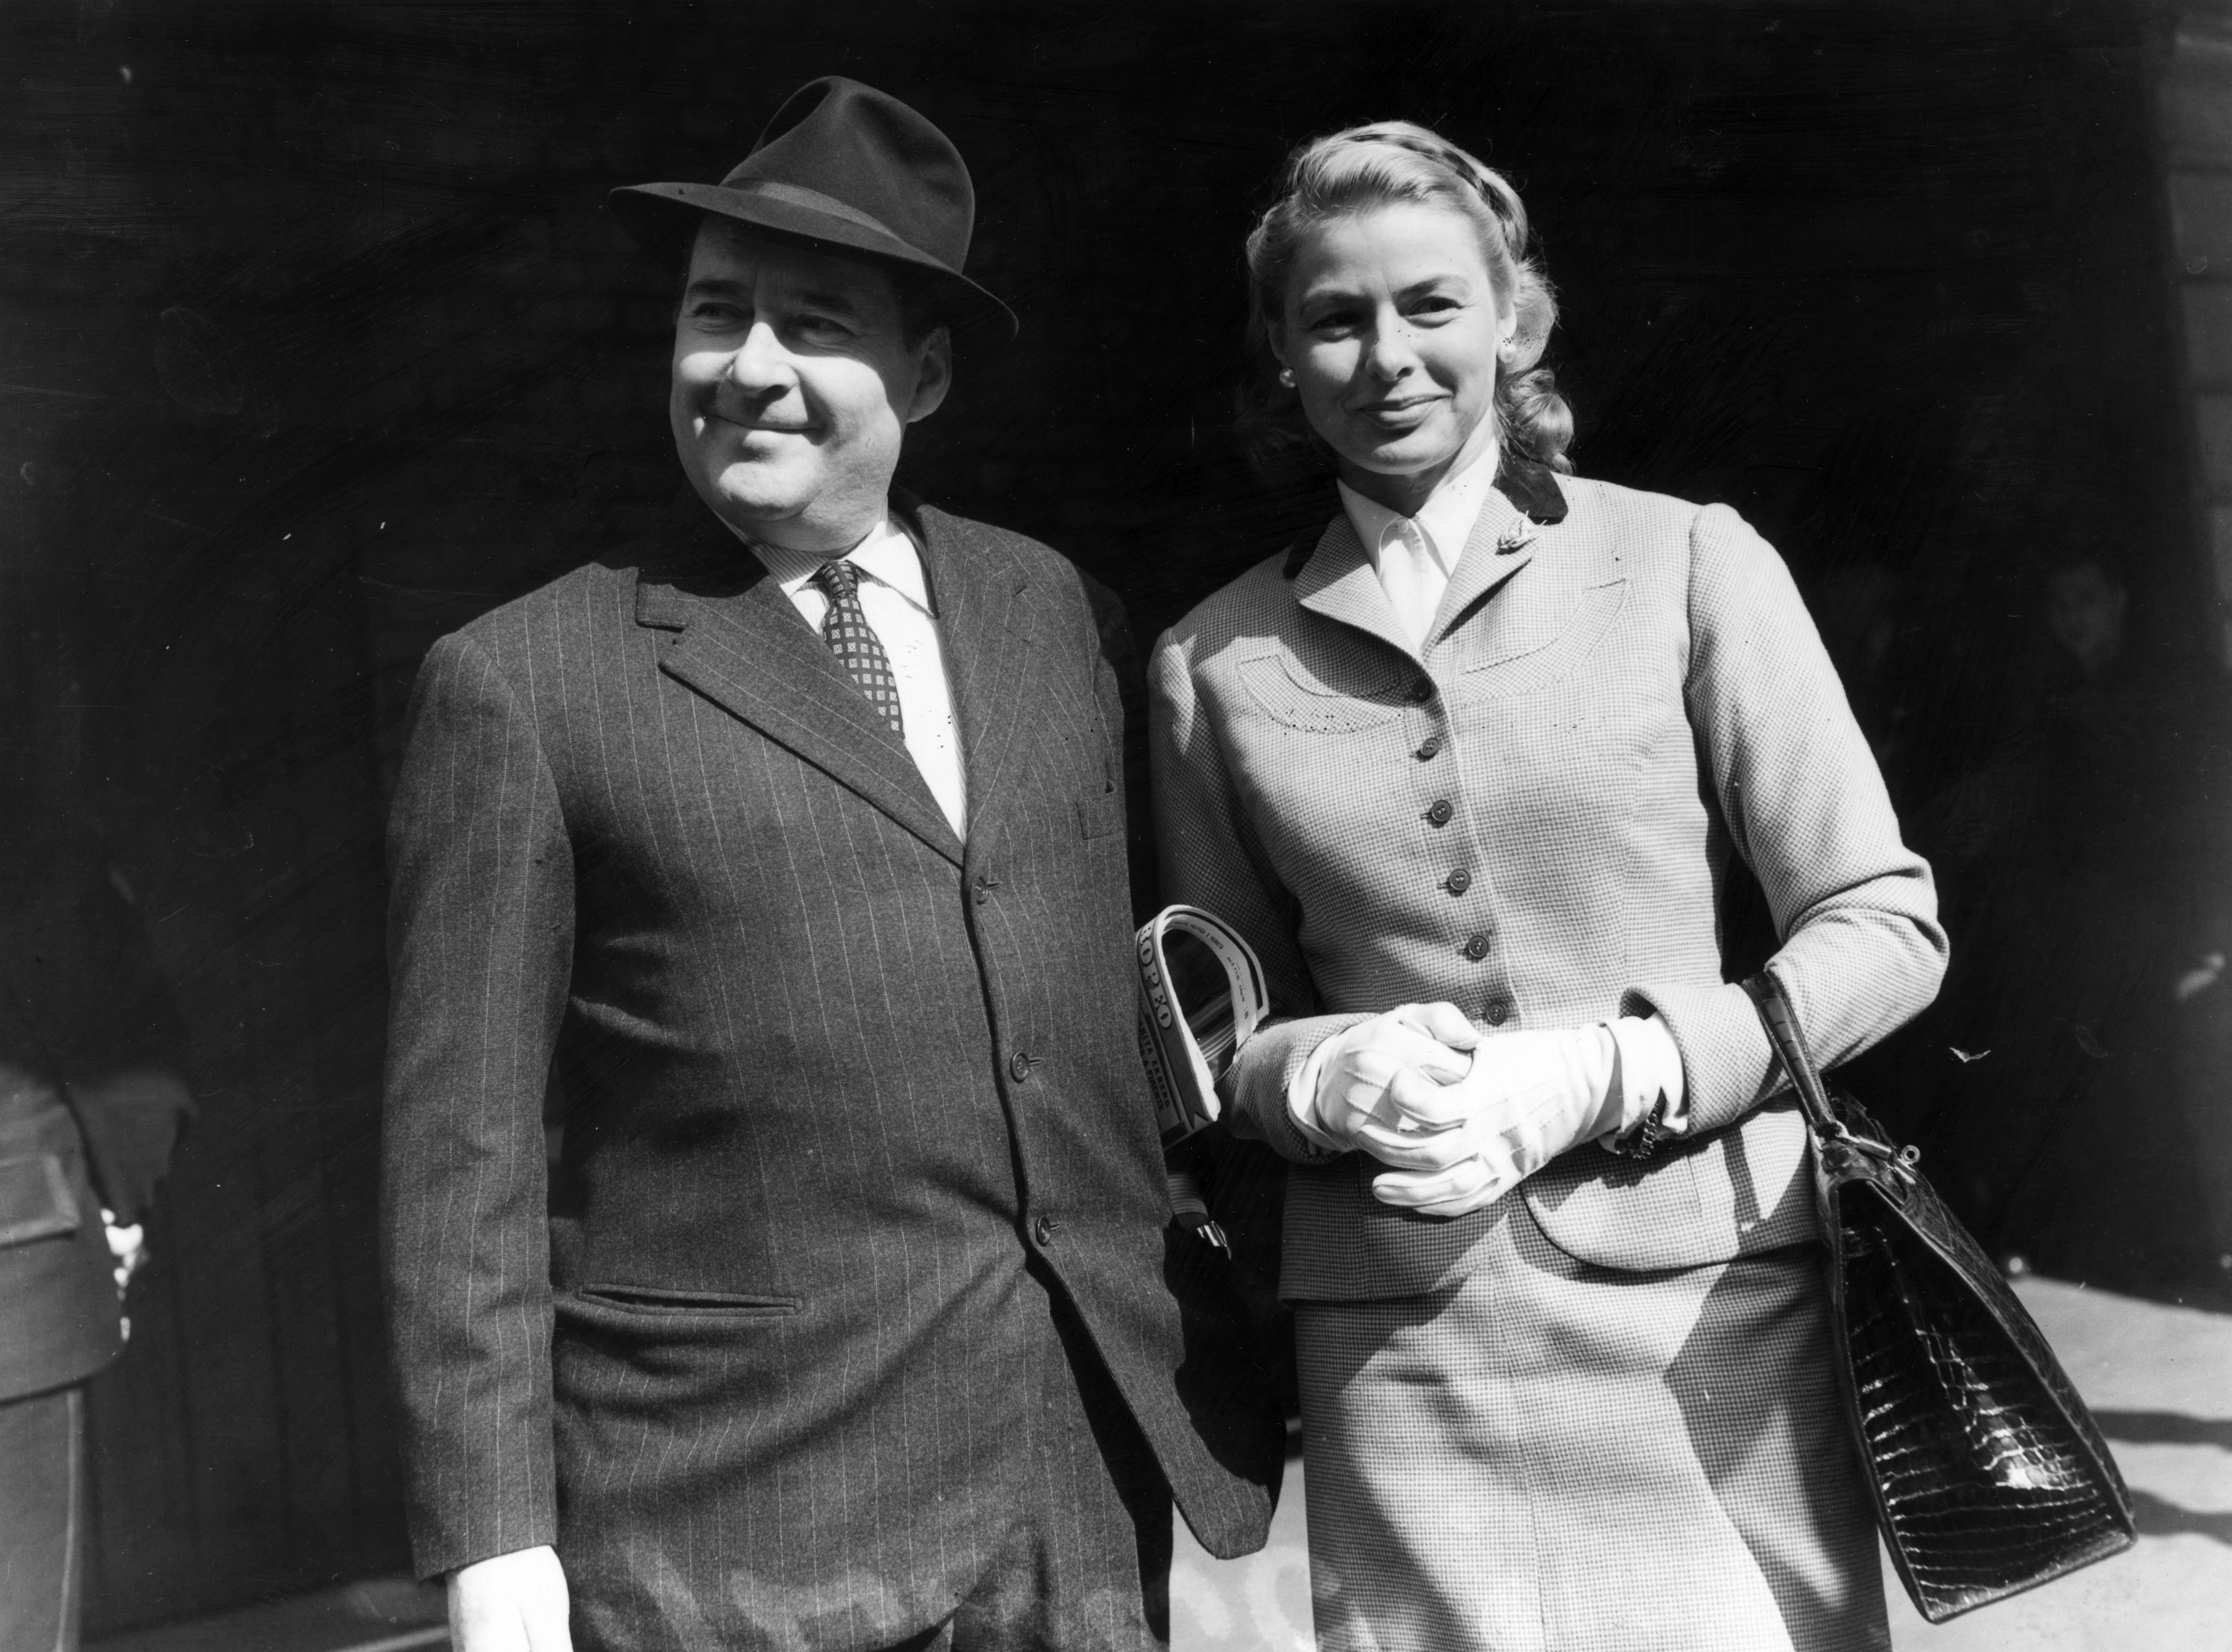 Actress Ingrid Bergman with her second husband Roberto Rossellini at London's Victoria Station on MAY 23 1956 | Source: Getty Images